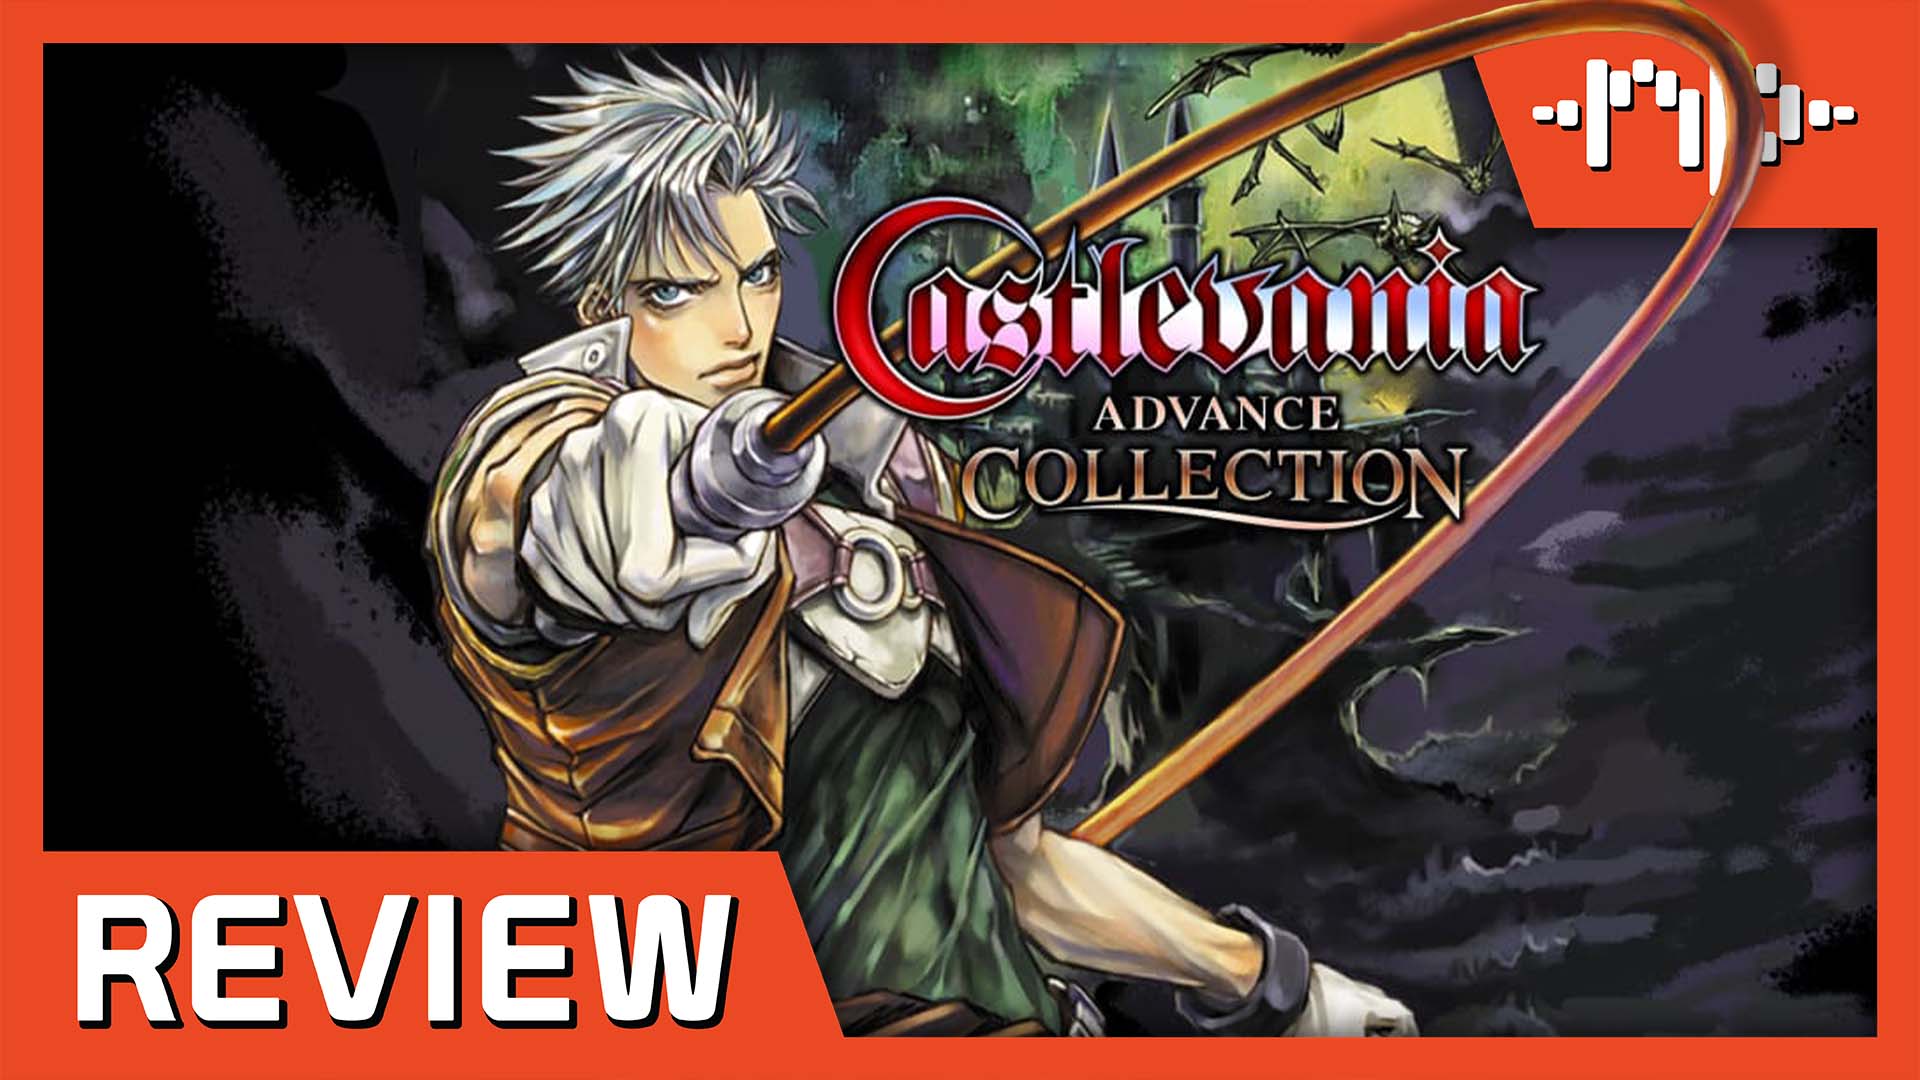 Castlevania Advance Collection HD Wallpapers